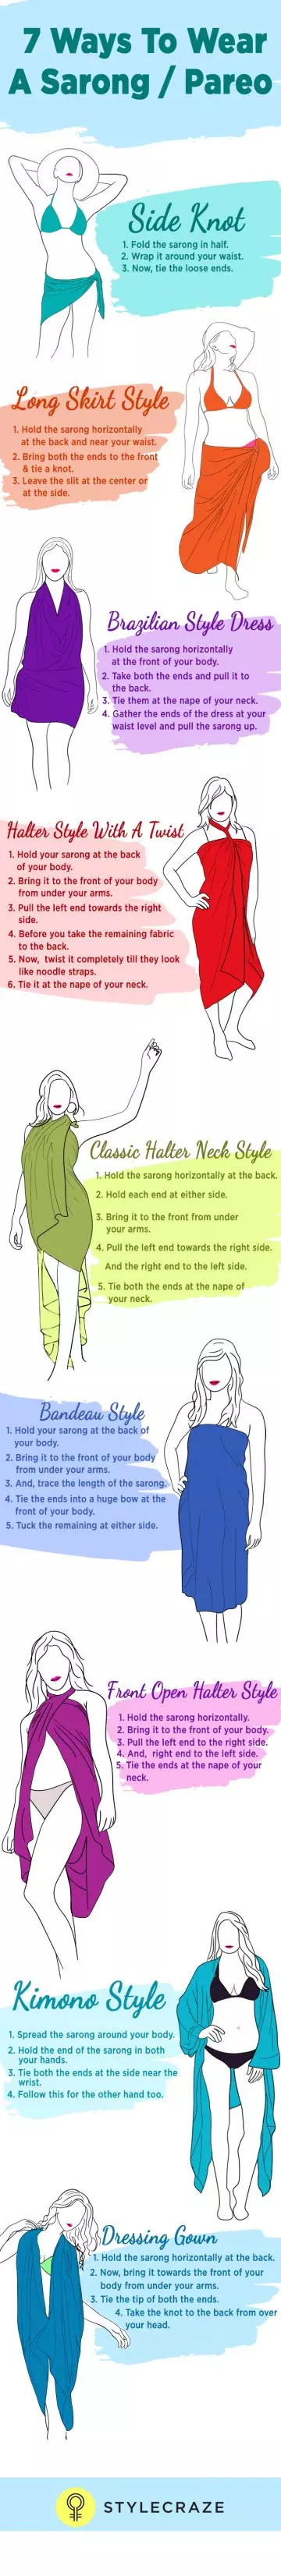 9 different ways to wear a sarong